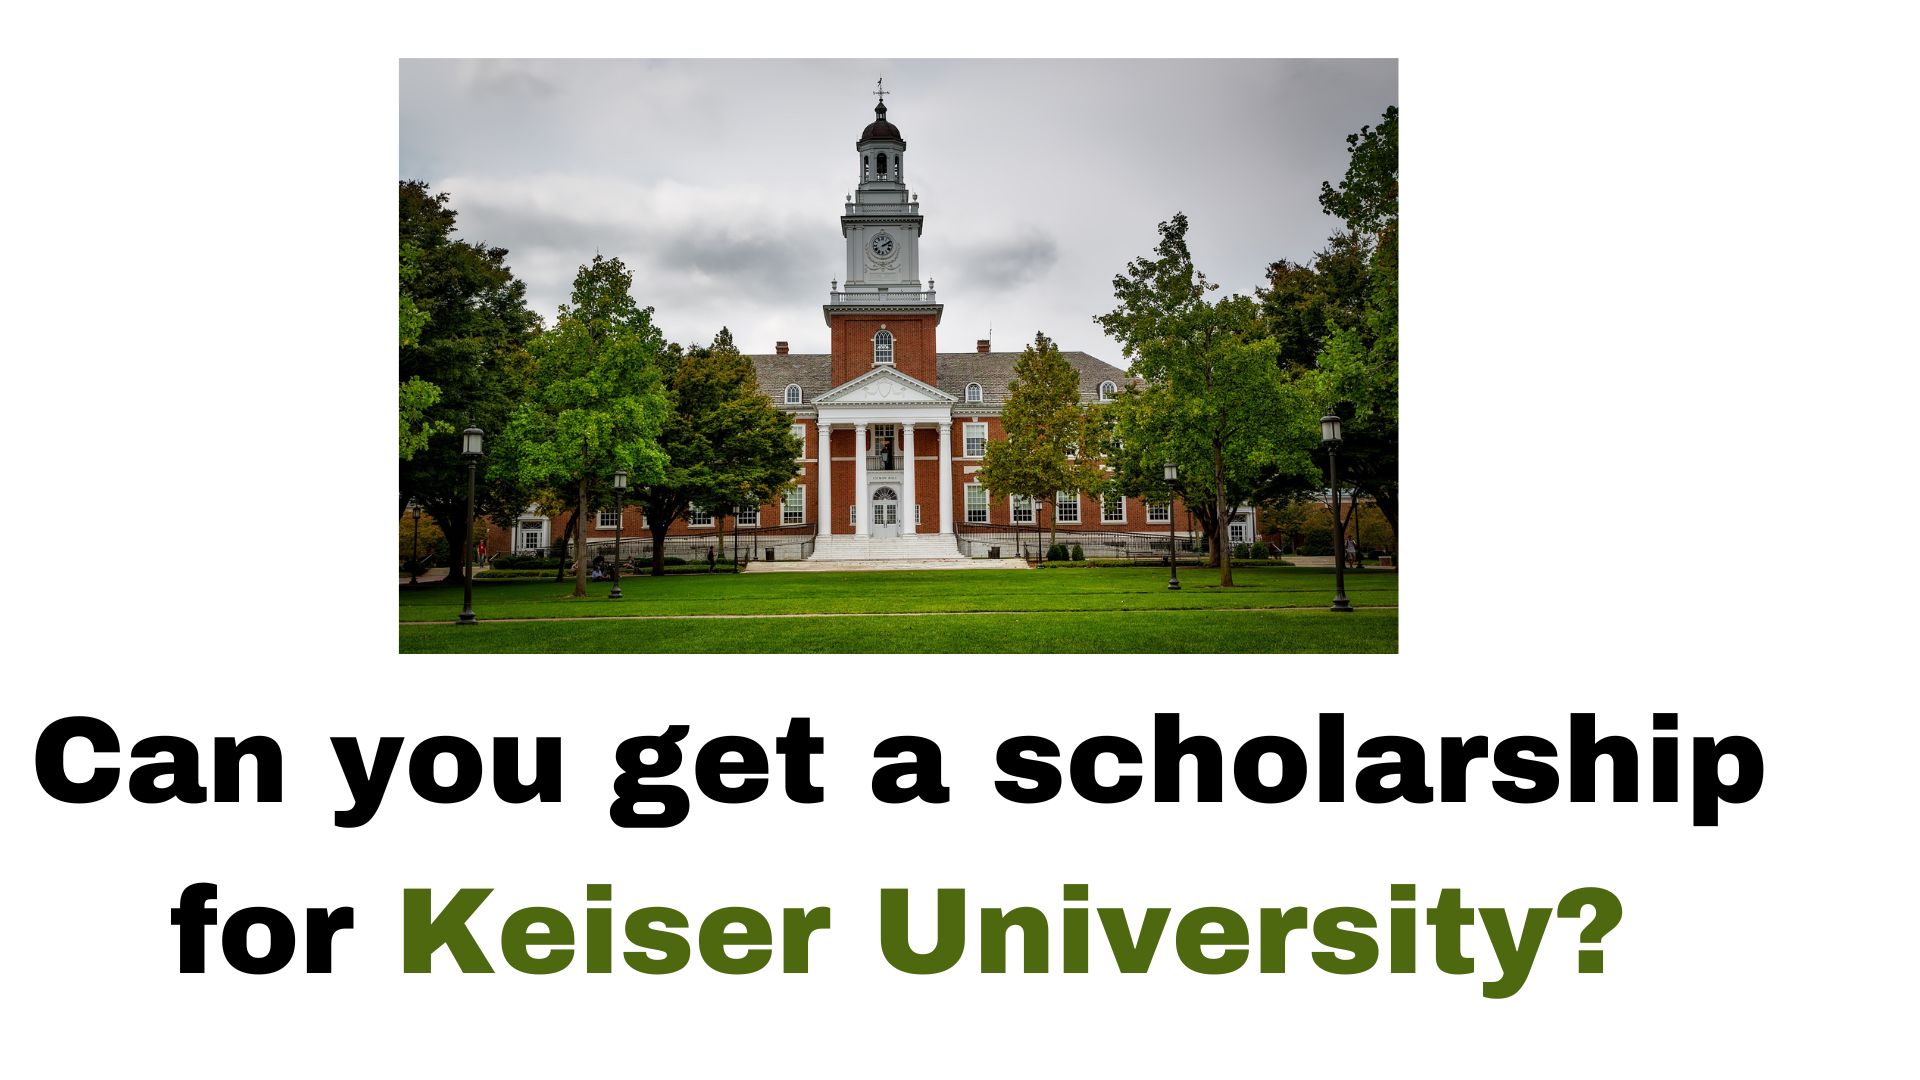 Can you get a scholarship for Keiser University?